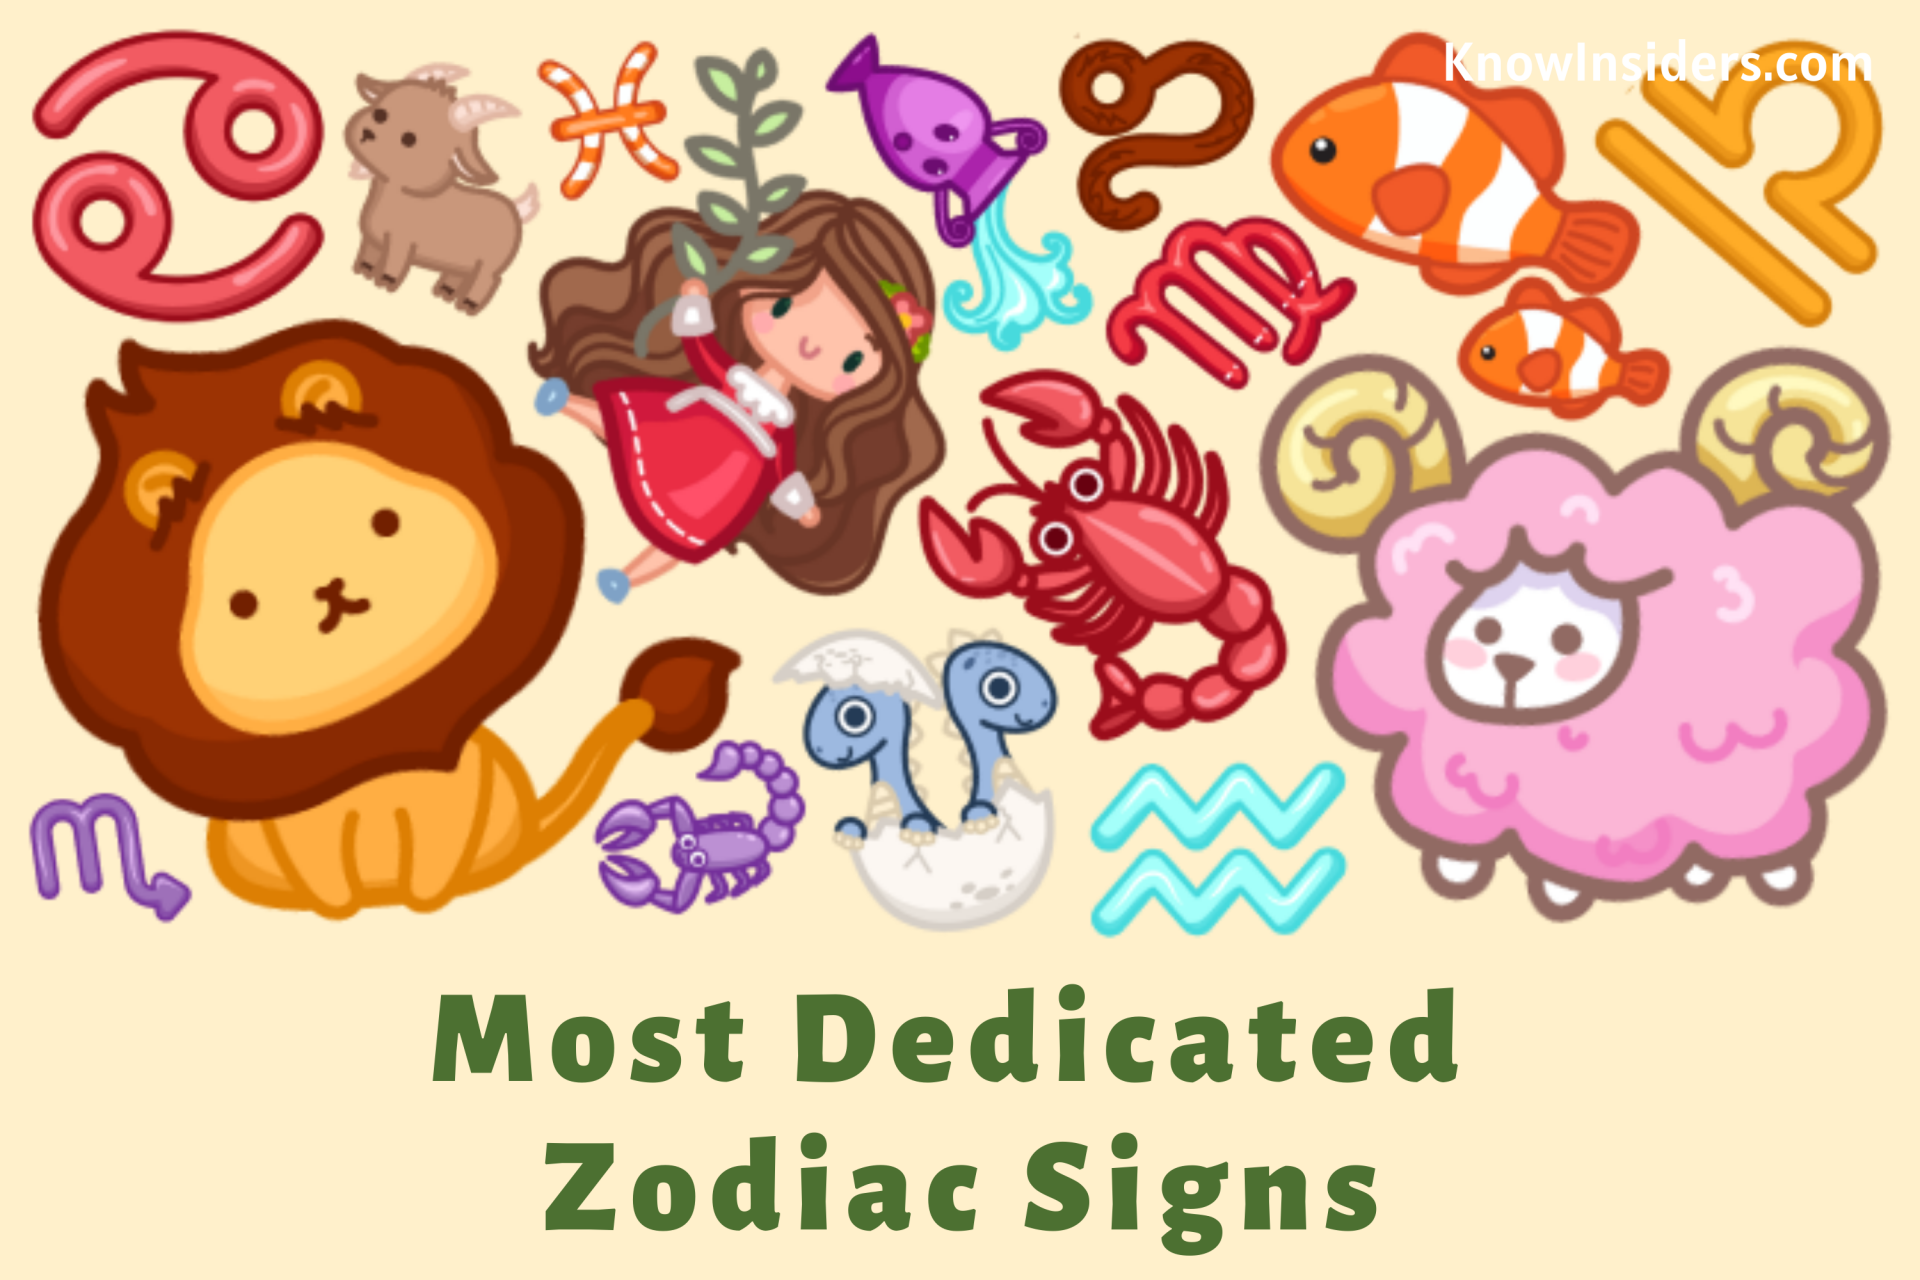 Top 5 Most Dedicated Zodiac Signs Accoring to Astrology